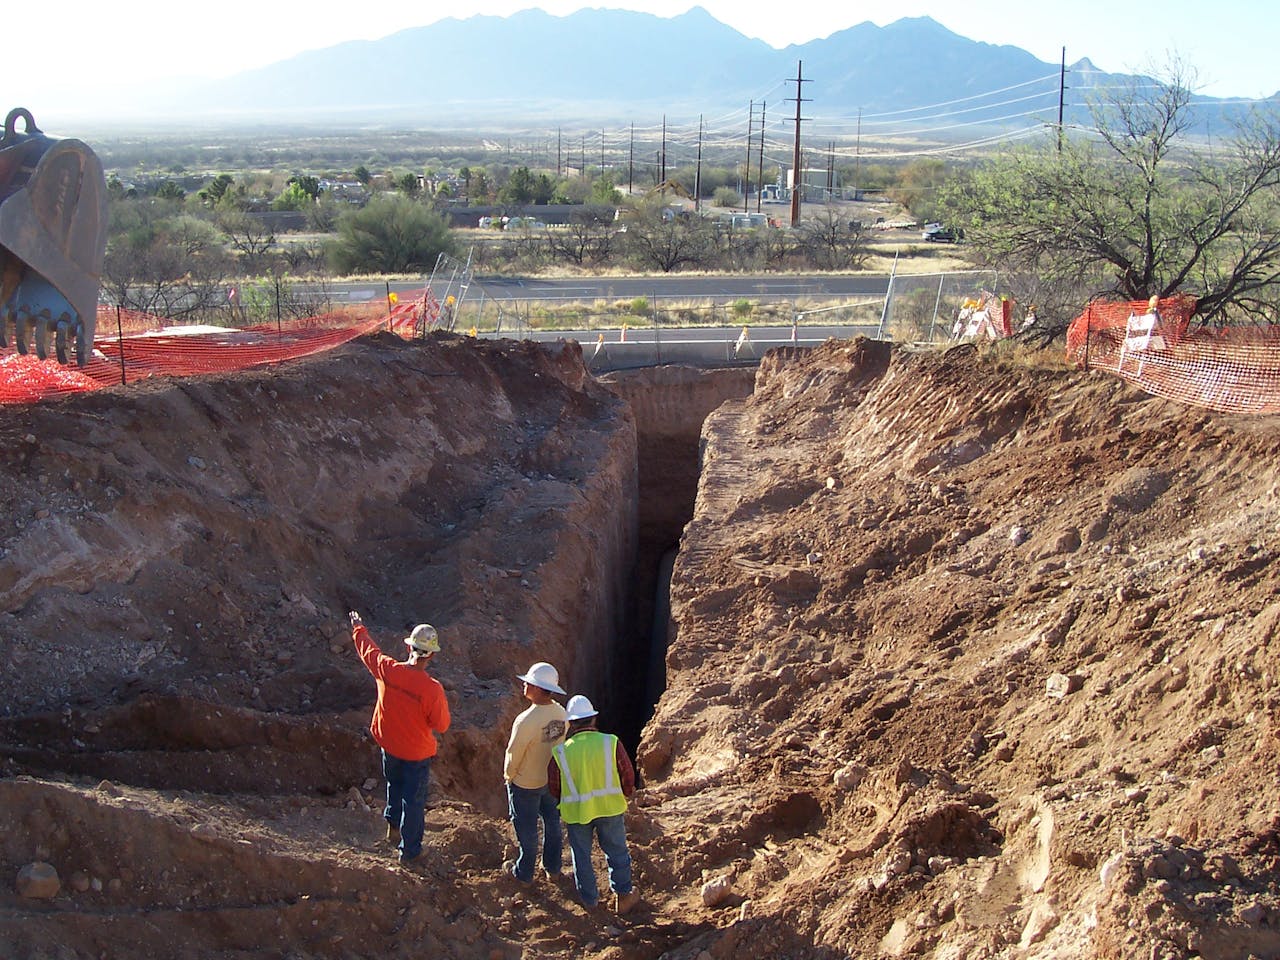 SSC Underground at a construction site in Arizona